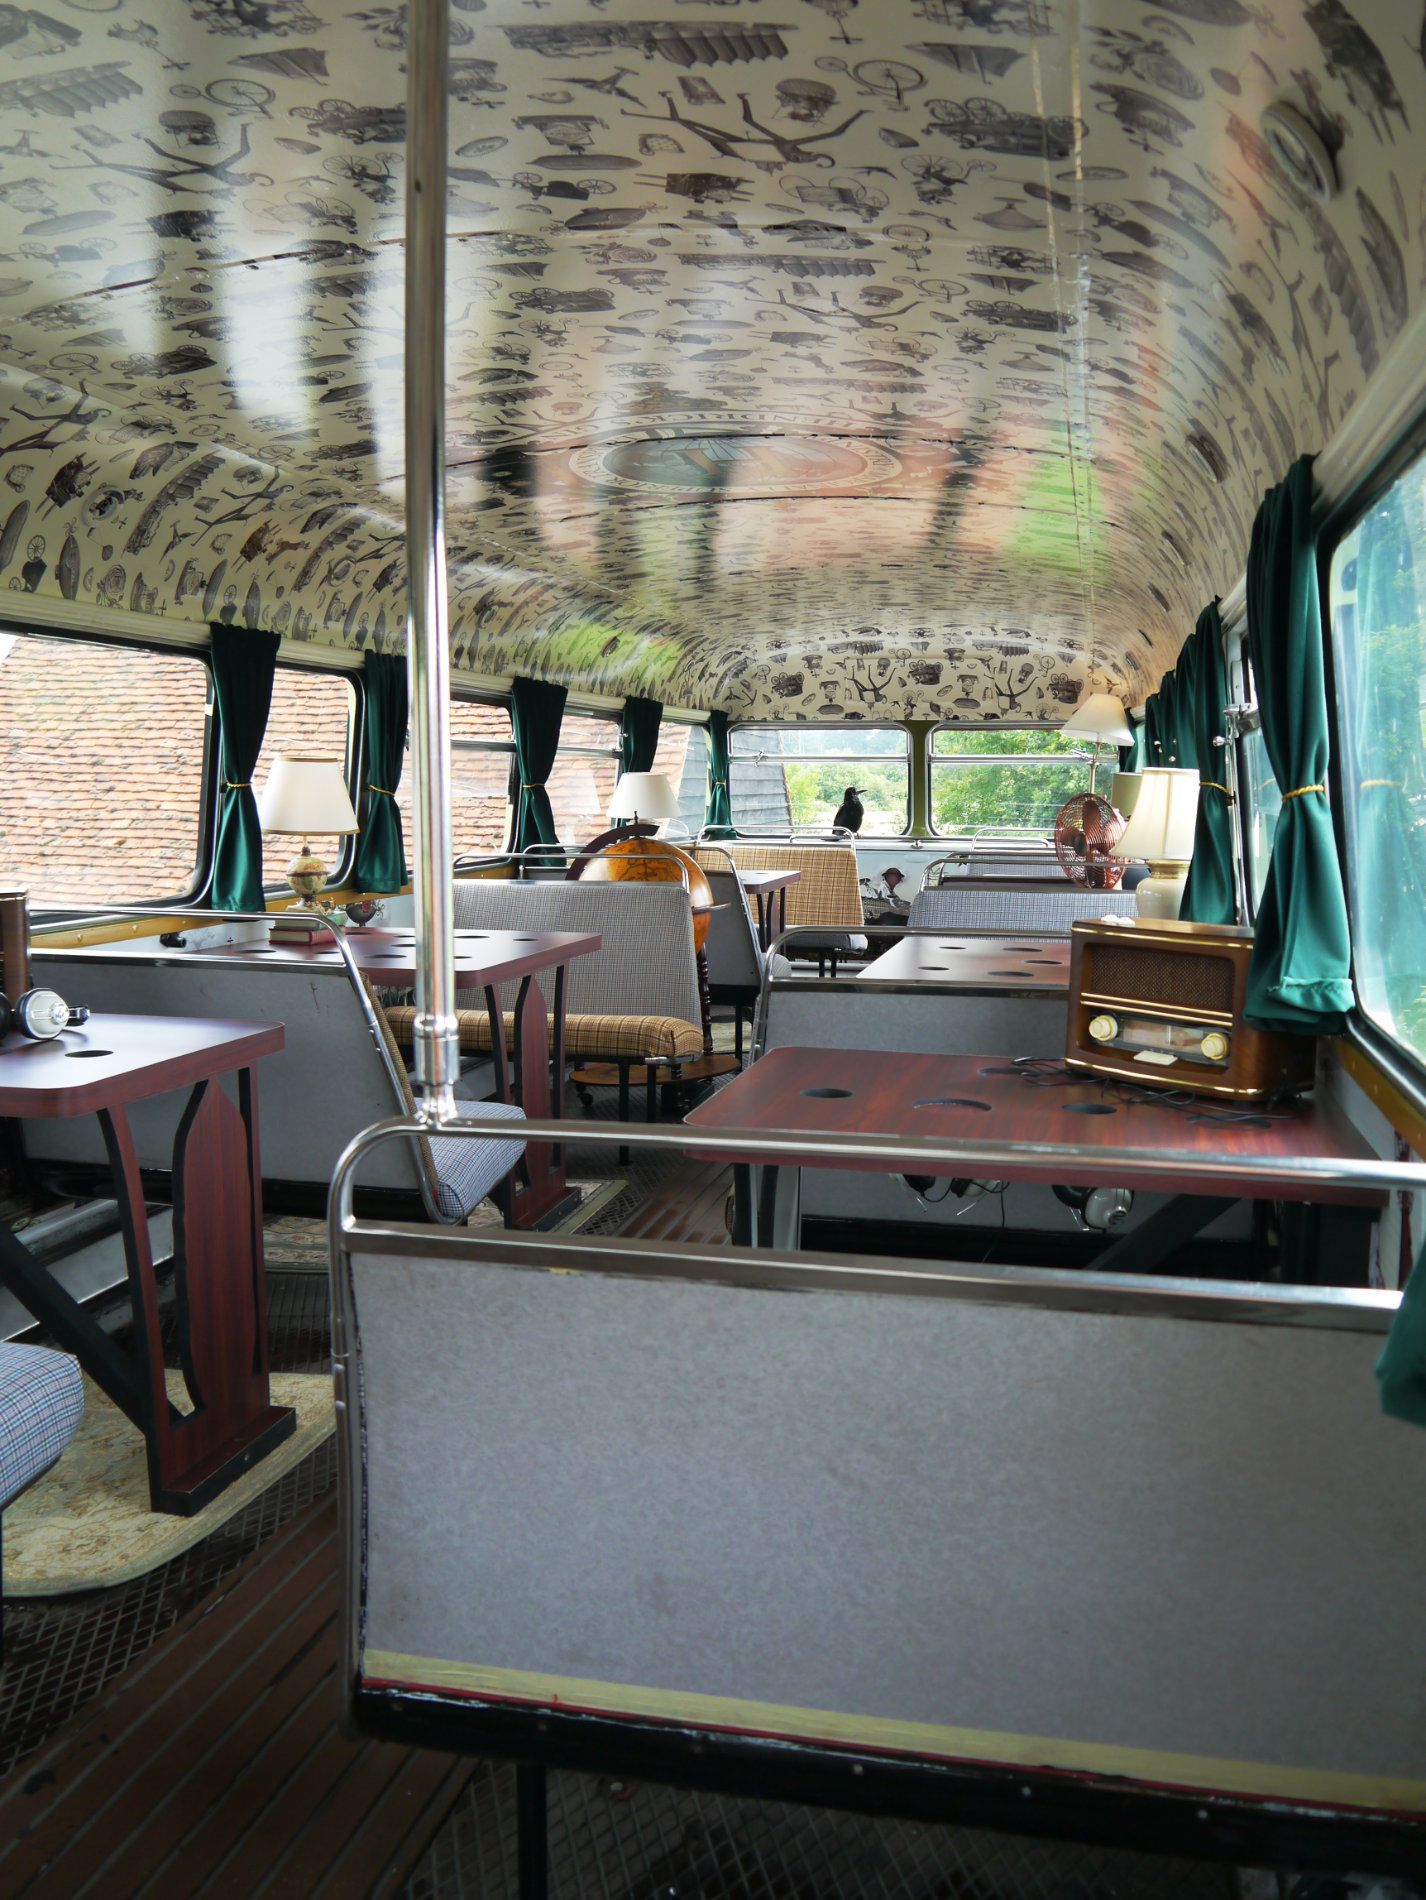 the inside of a bus with tables and chairs